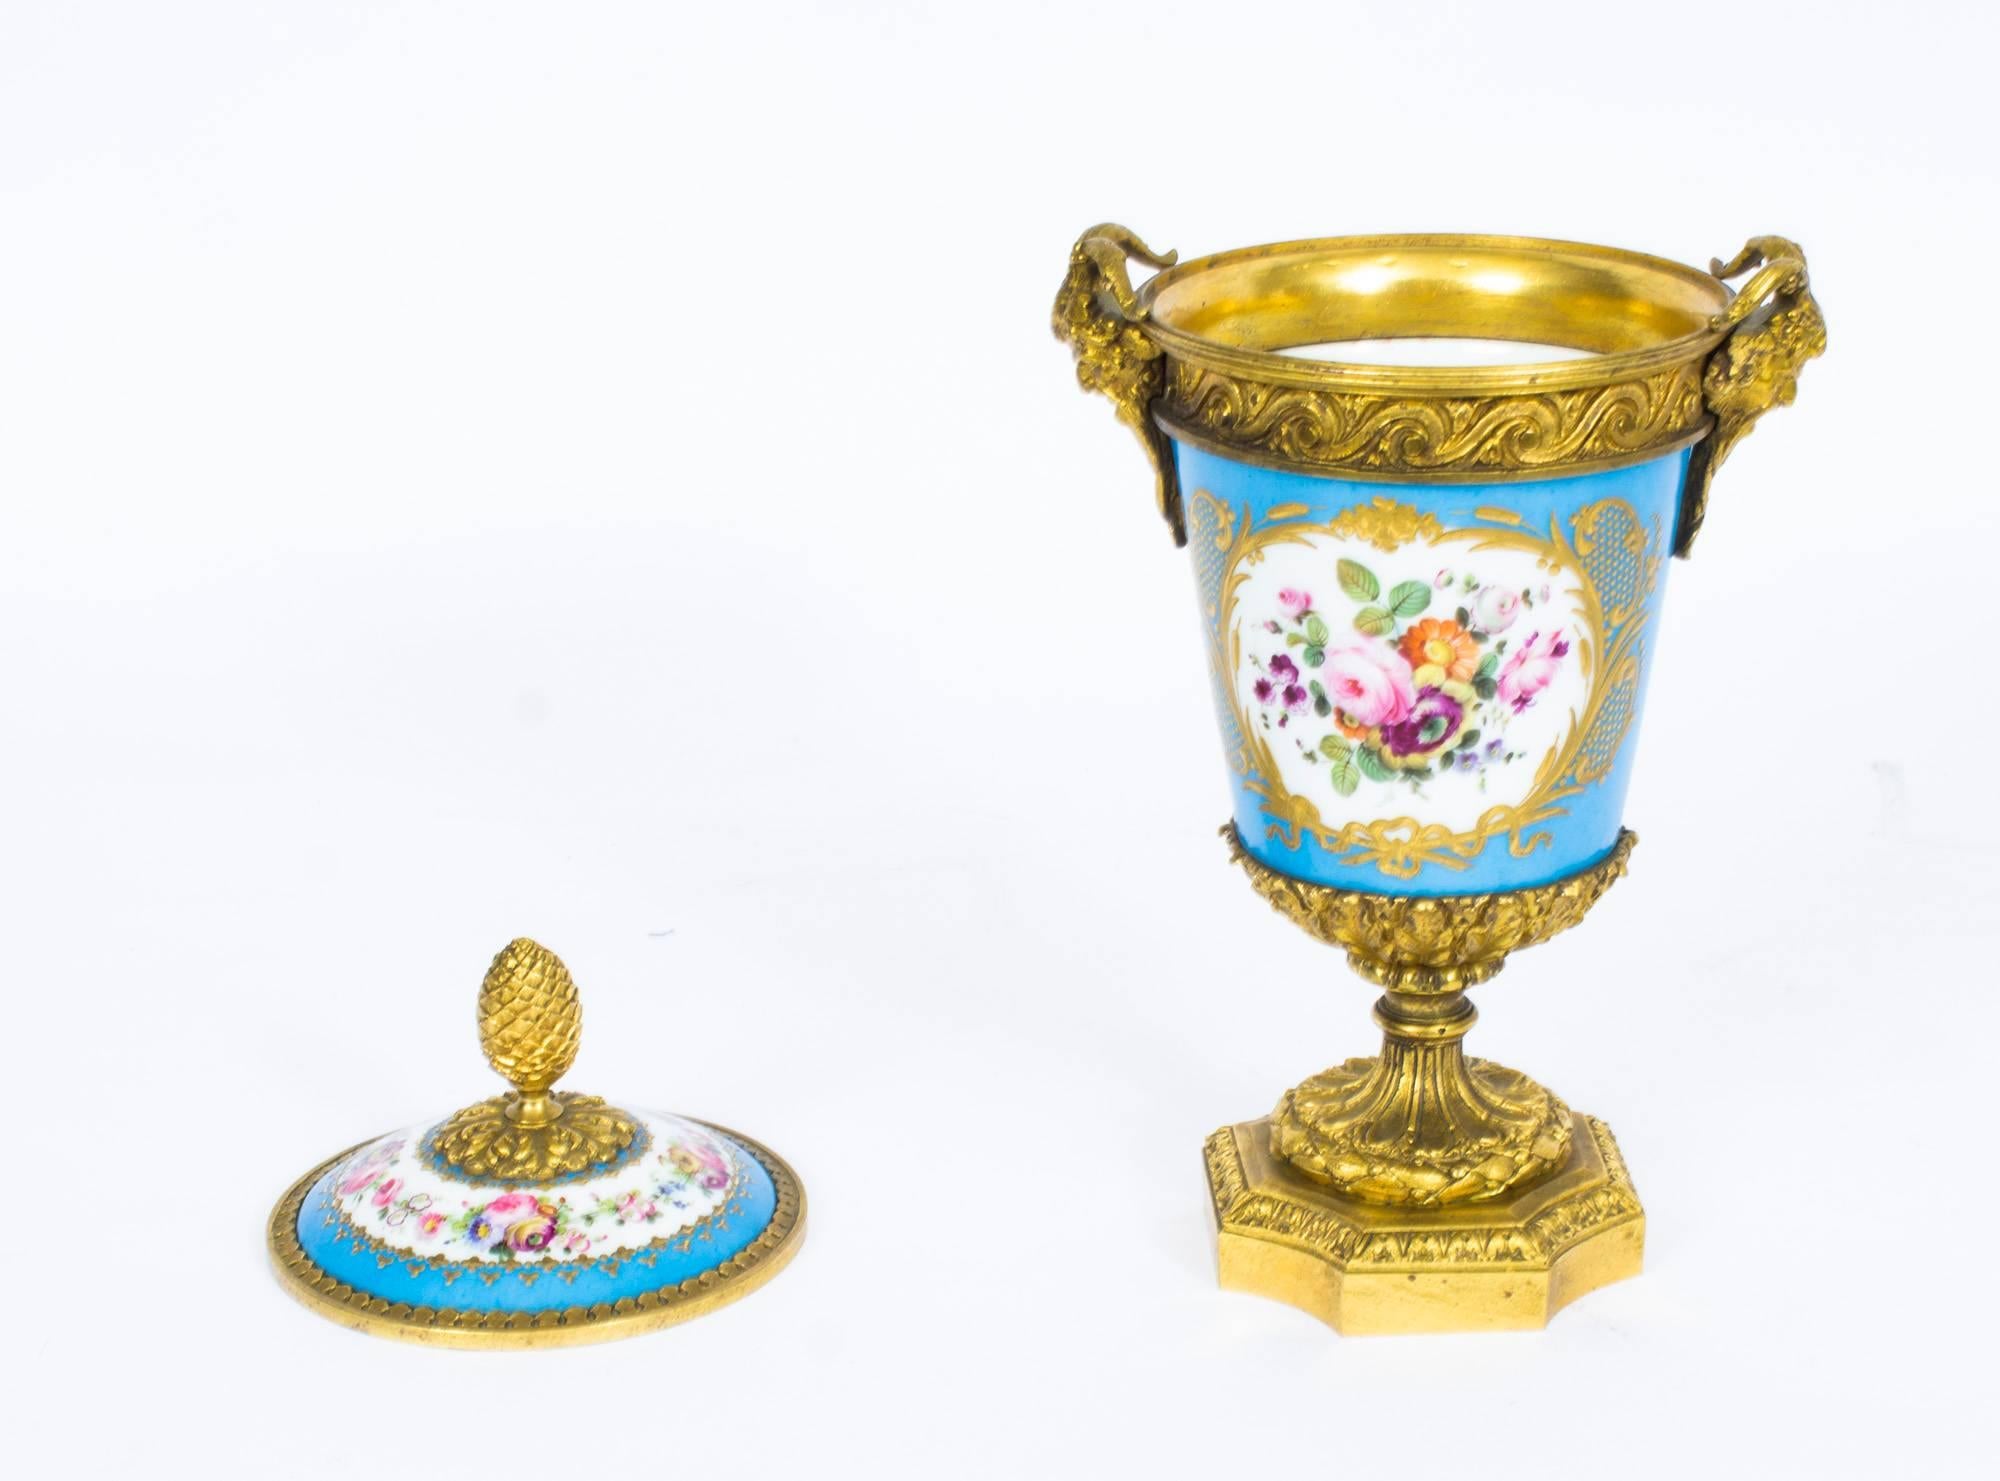 19th Century Pair of French Ormolu-Mounted Sèvres Lidded Urns Vases 2